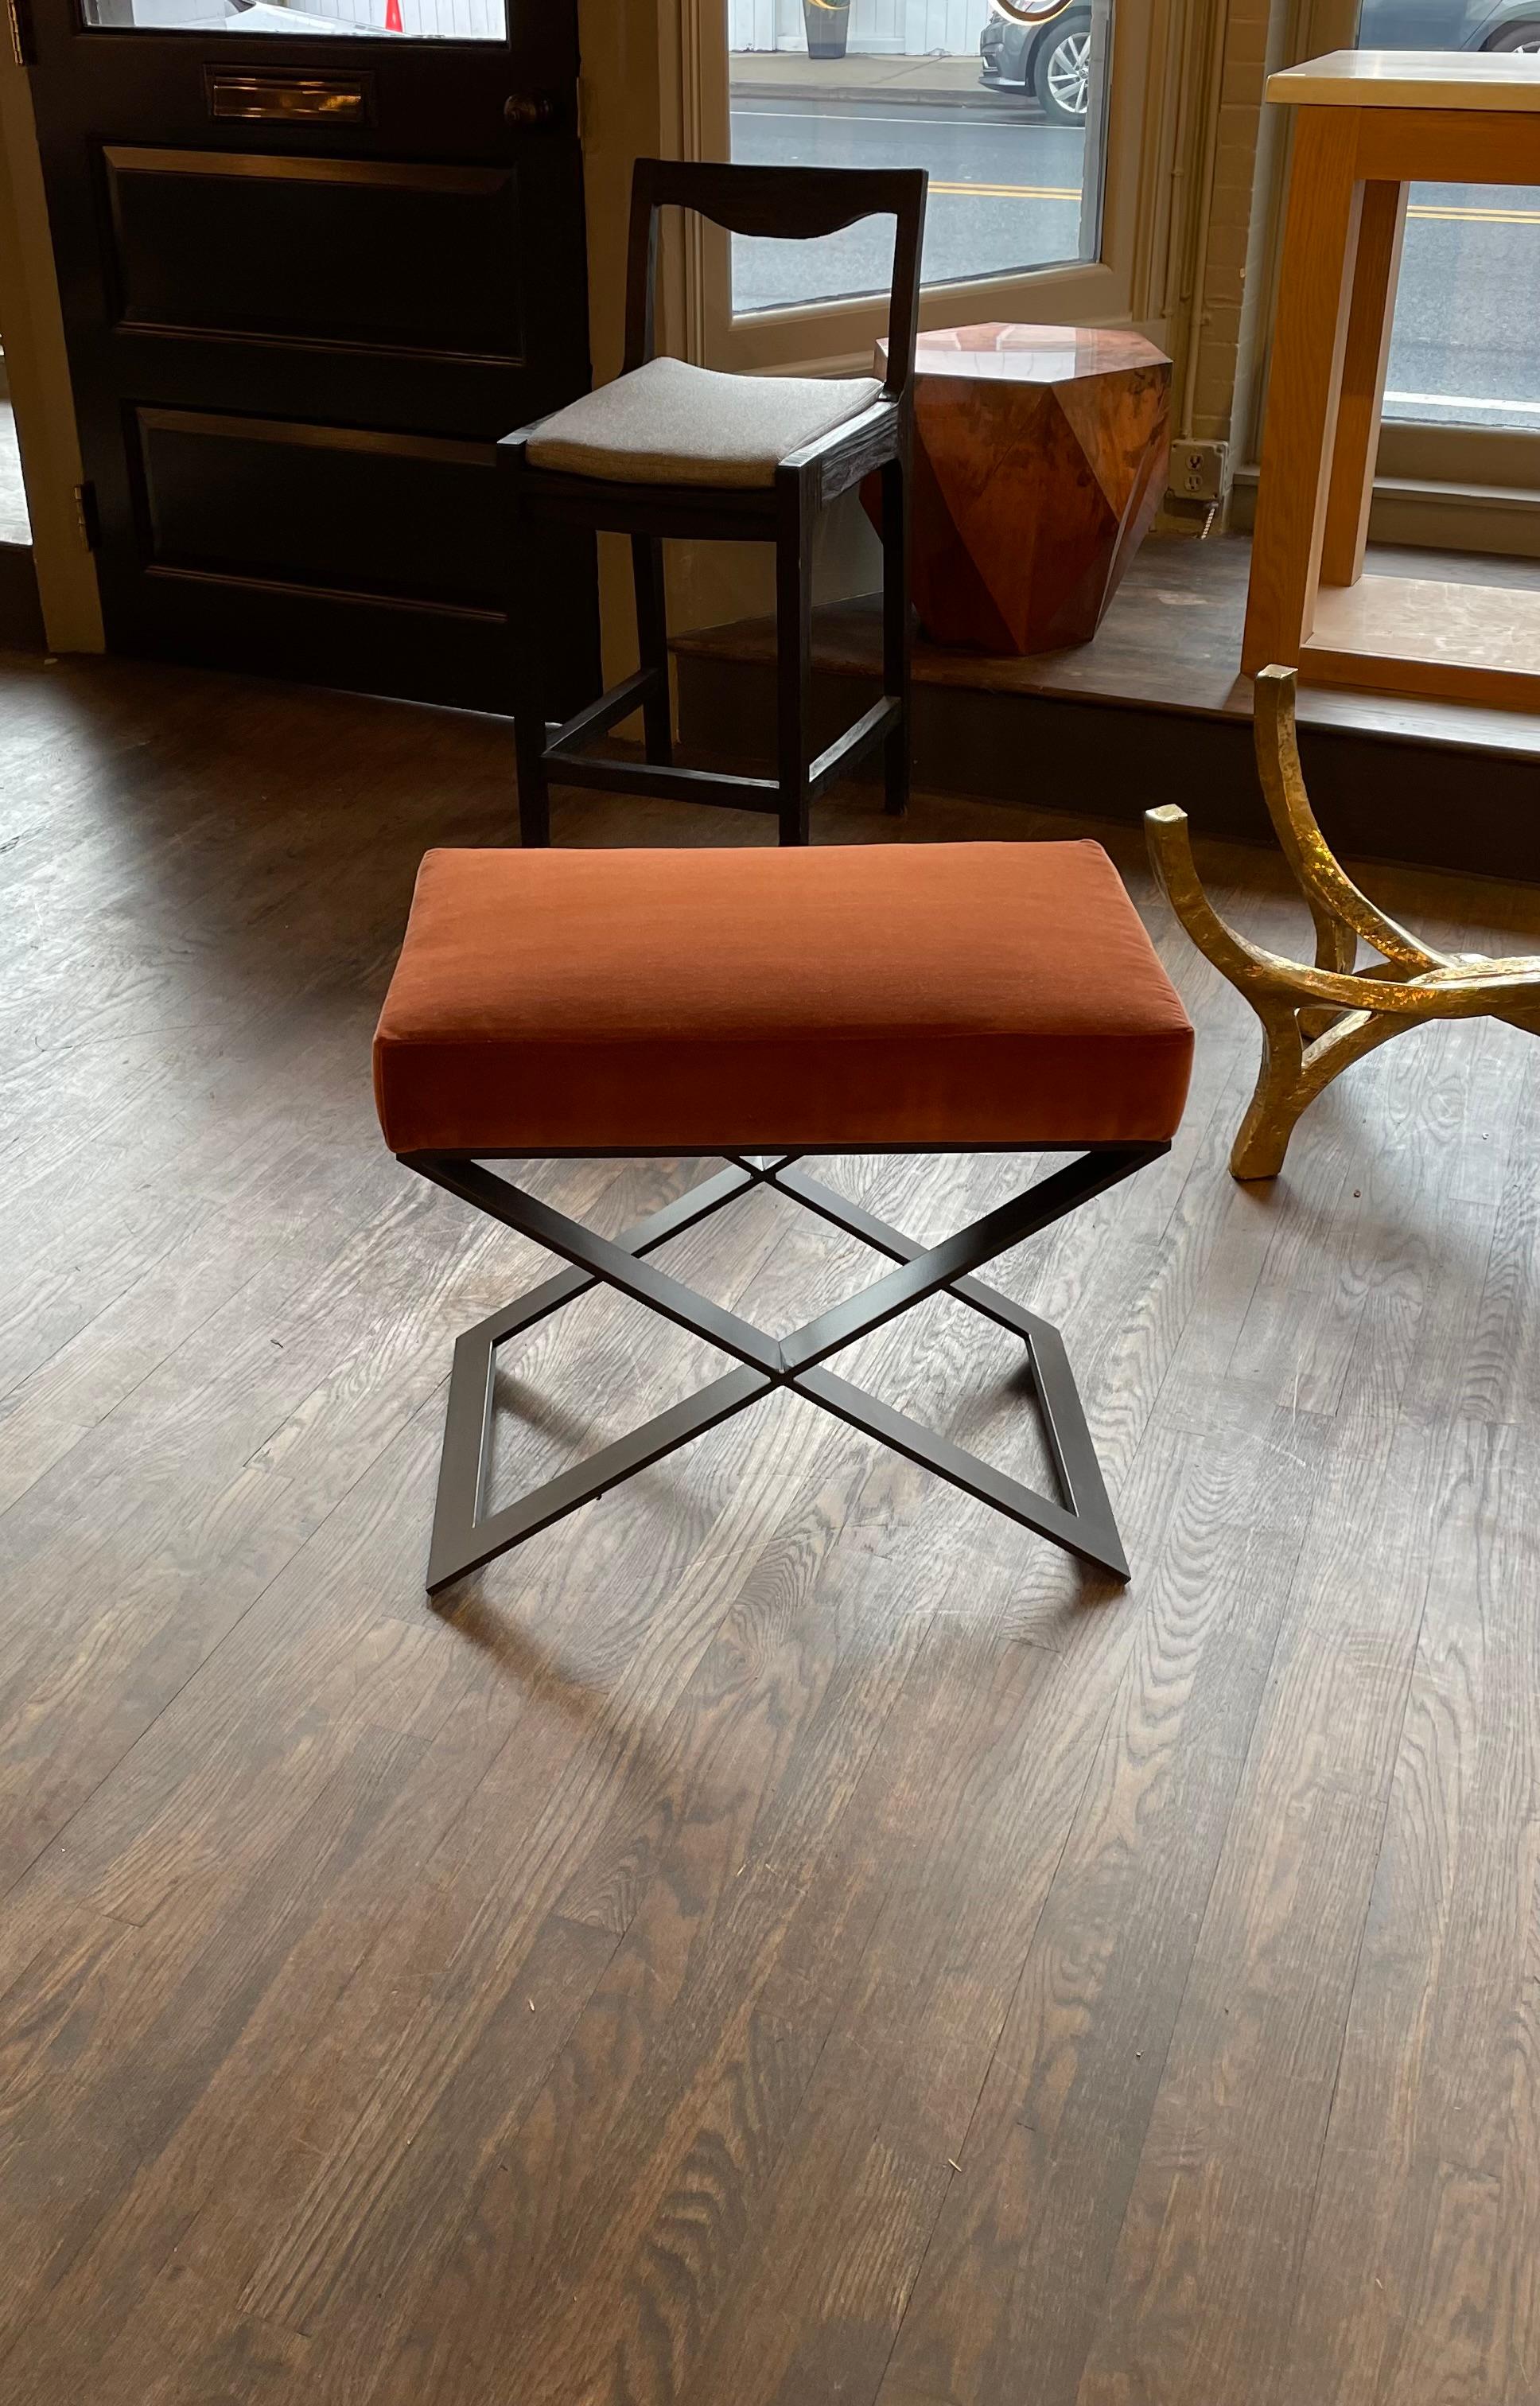 Sleek upholstered stool with Cris cross metal base.
Price listed is COM. Can be made in custom sizes and base finishes.
Standard base finishes are Black or Statuary Bronze.
ASTELE Velvet and leather options available for an additional cost.